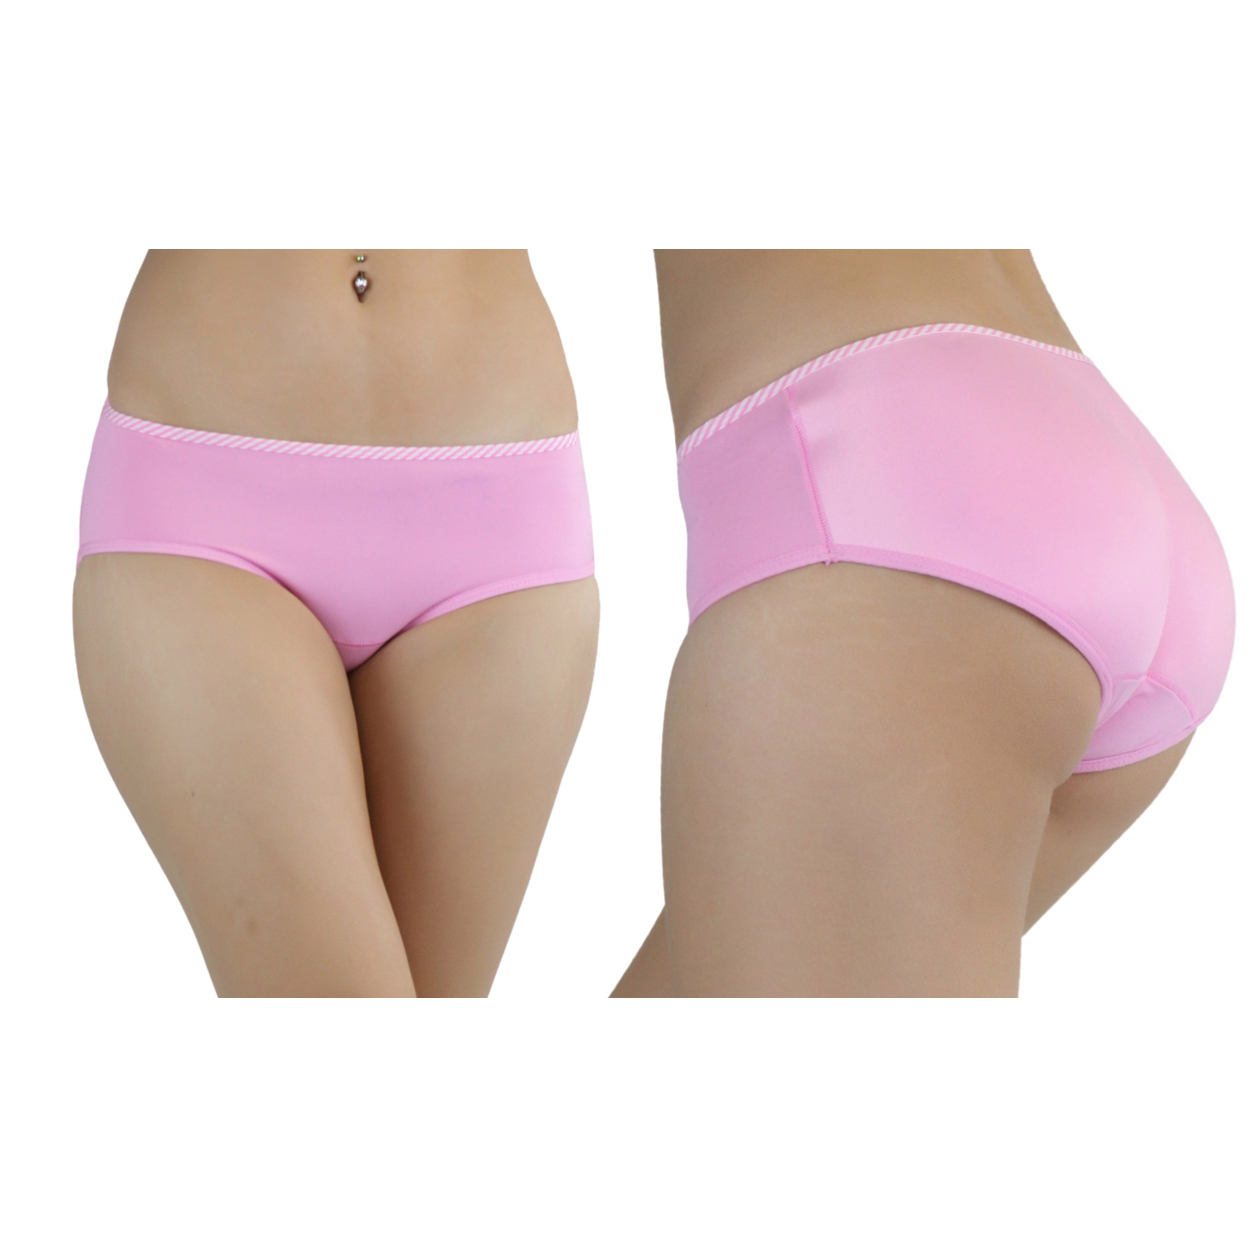 Women's Instant Booty Boosters Padded Panty - Pink, L